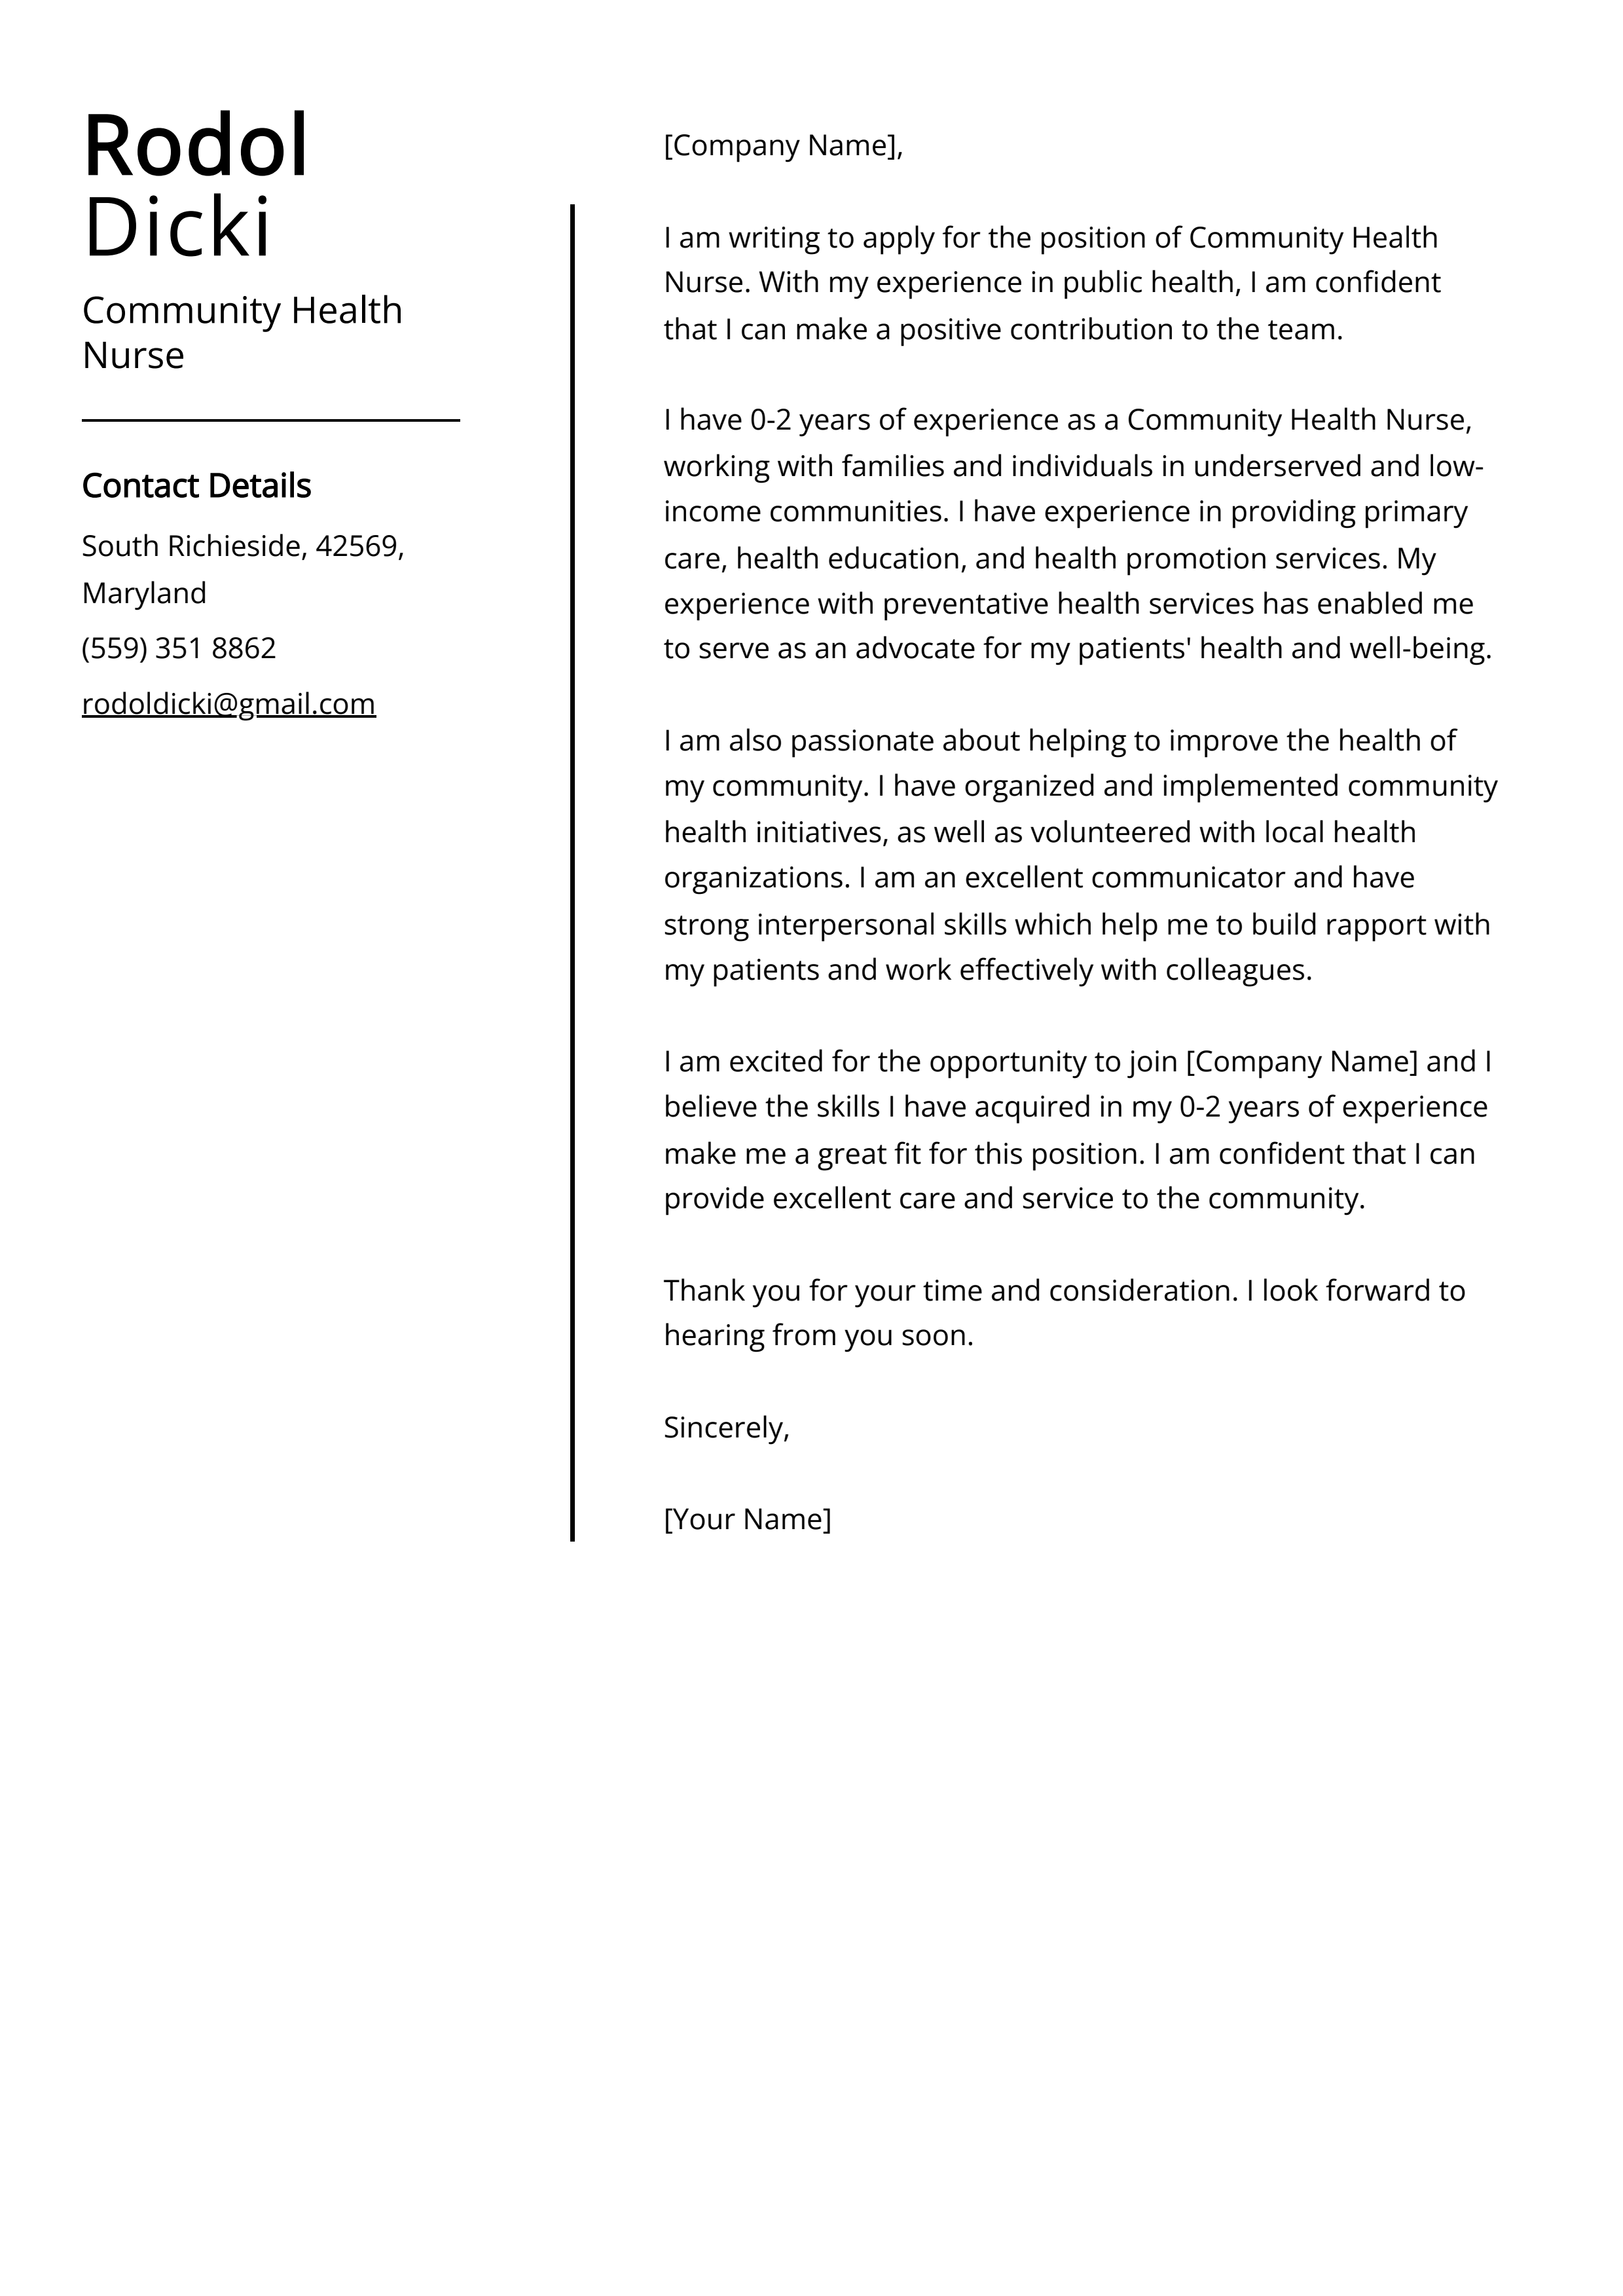 Community Health Nurse Cover Letter Example